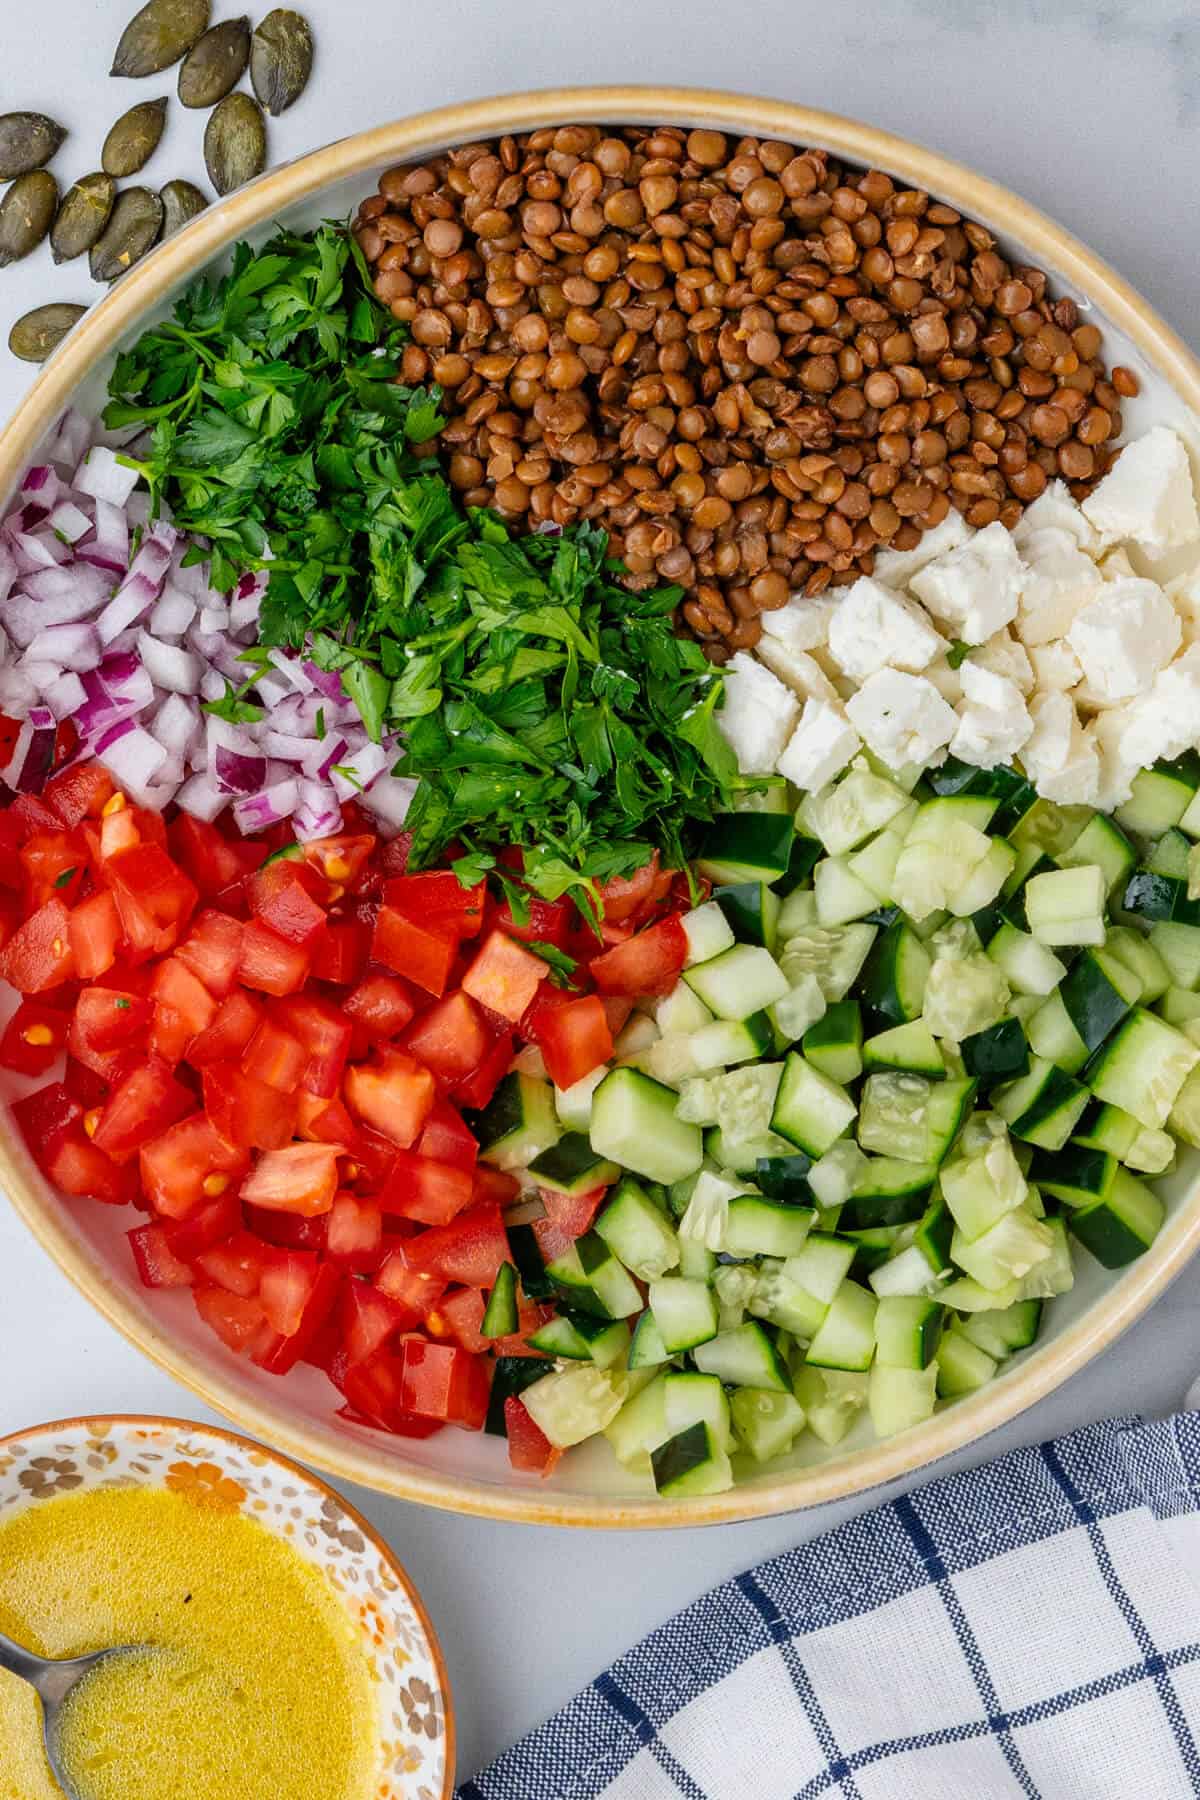 Chopped ingredients in a bowl before being mixed